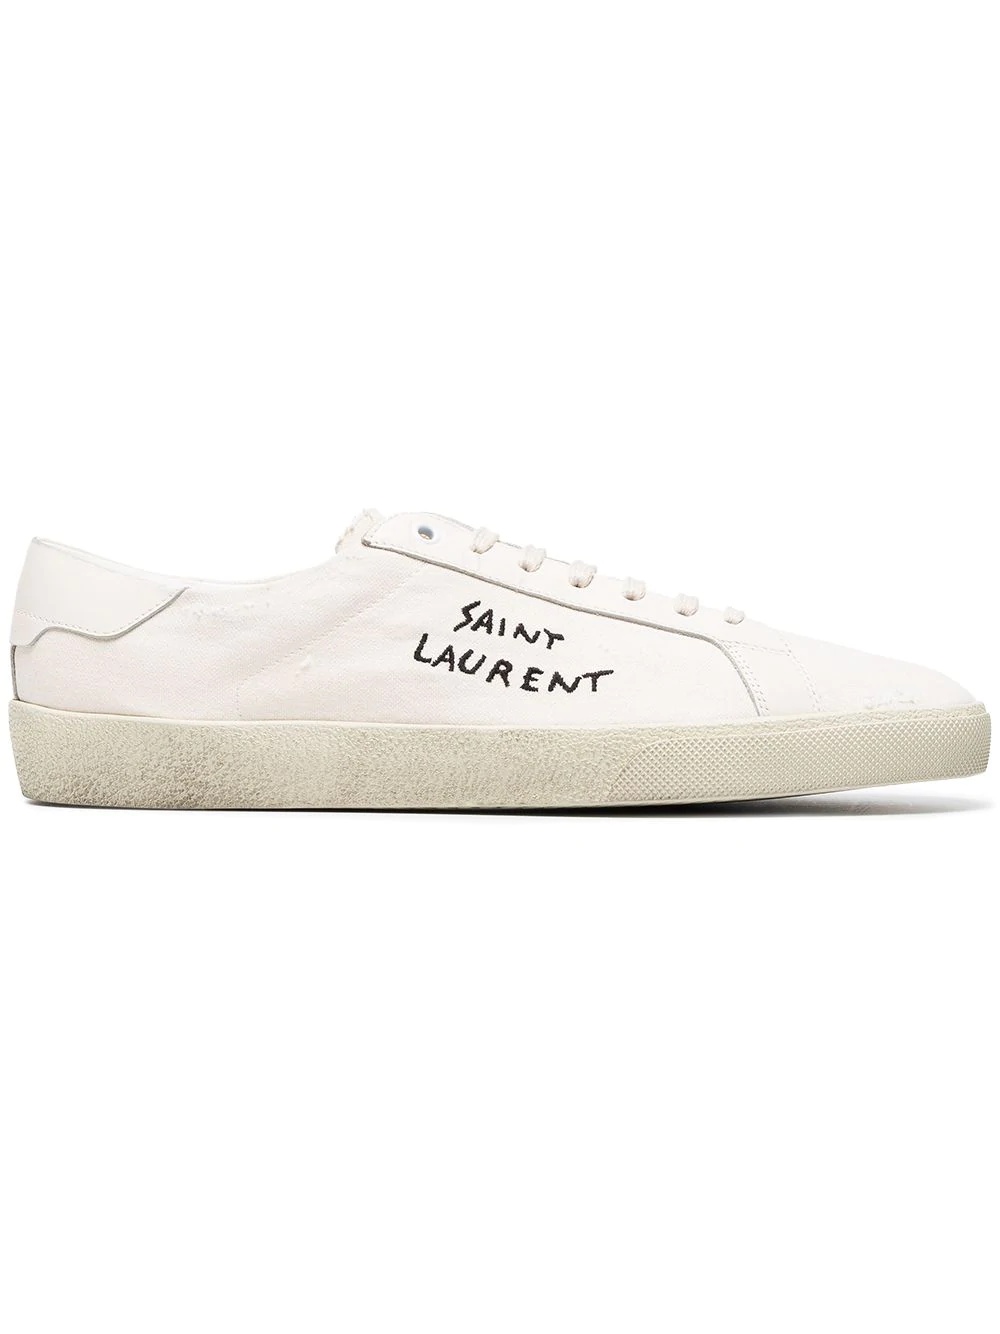 classic SL/06 embroidered sneakers - 1